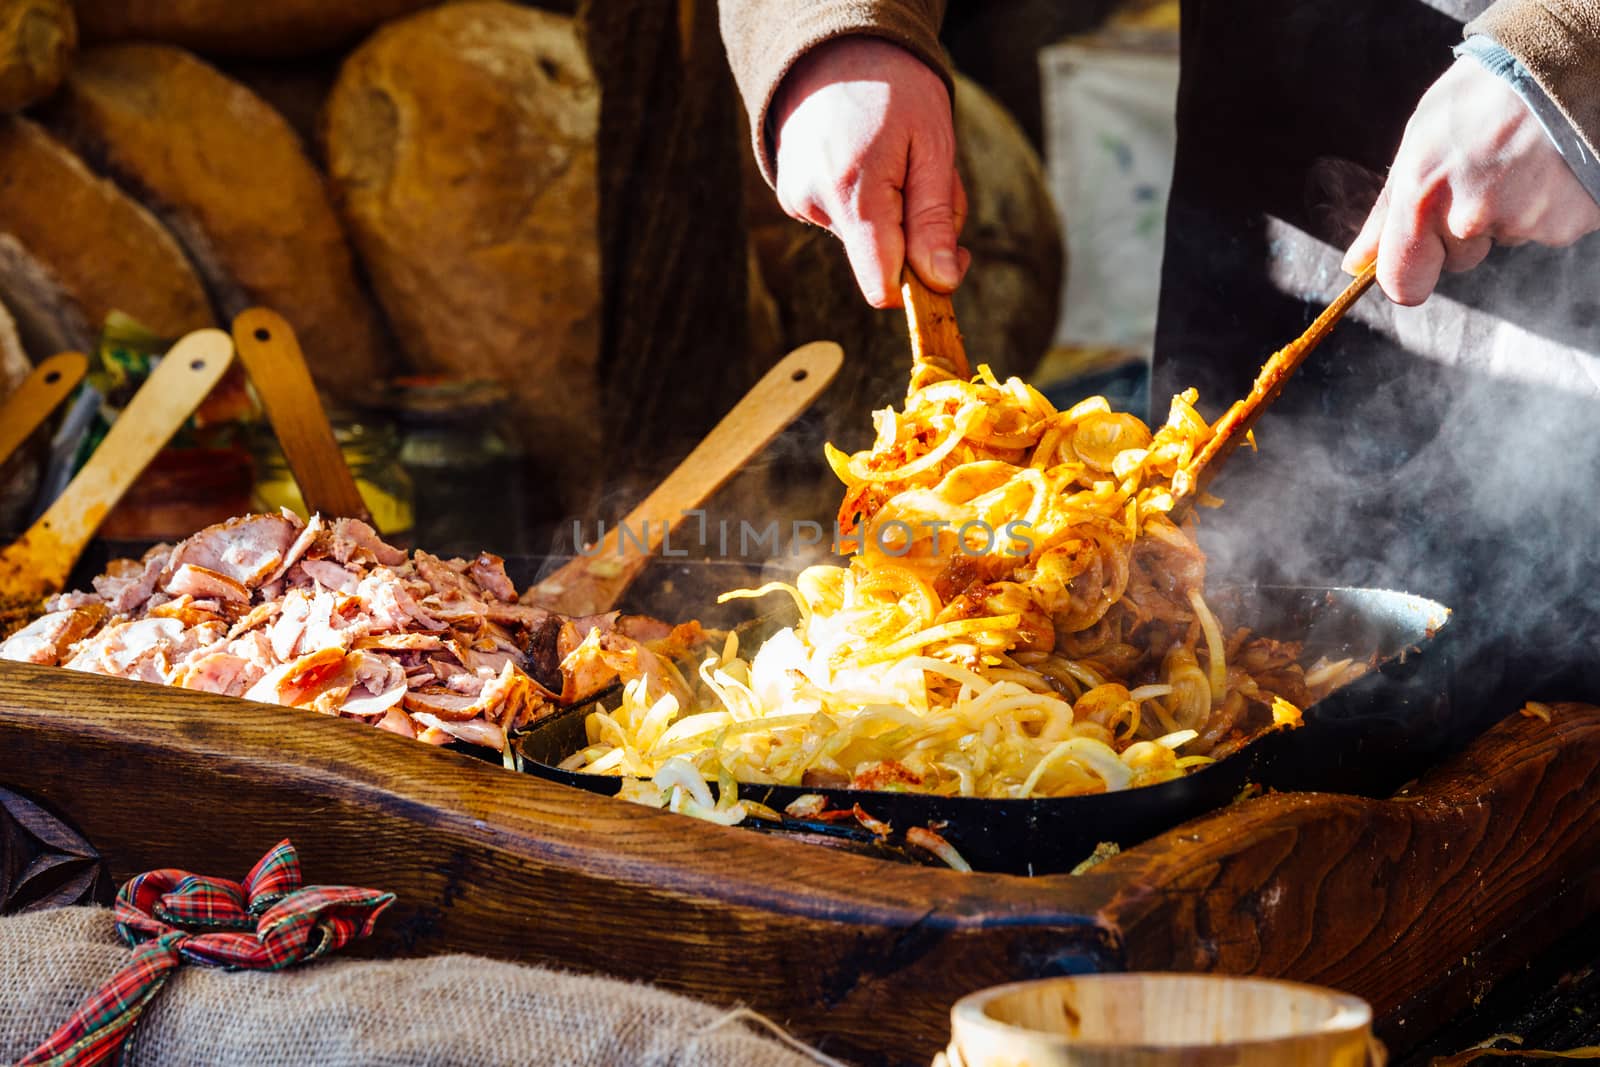 Krakow Christmas market stall serving traditional slices of bread with grilled meat, onions and sauce.